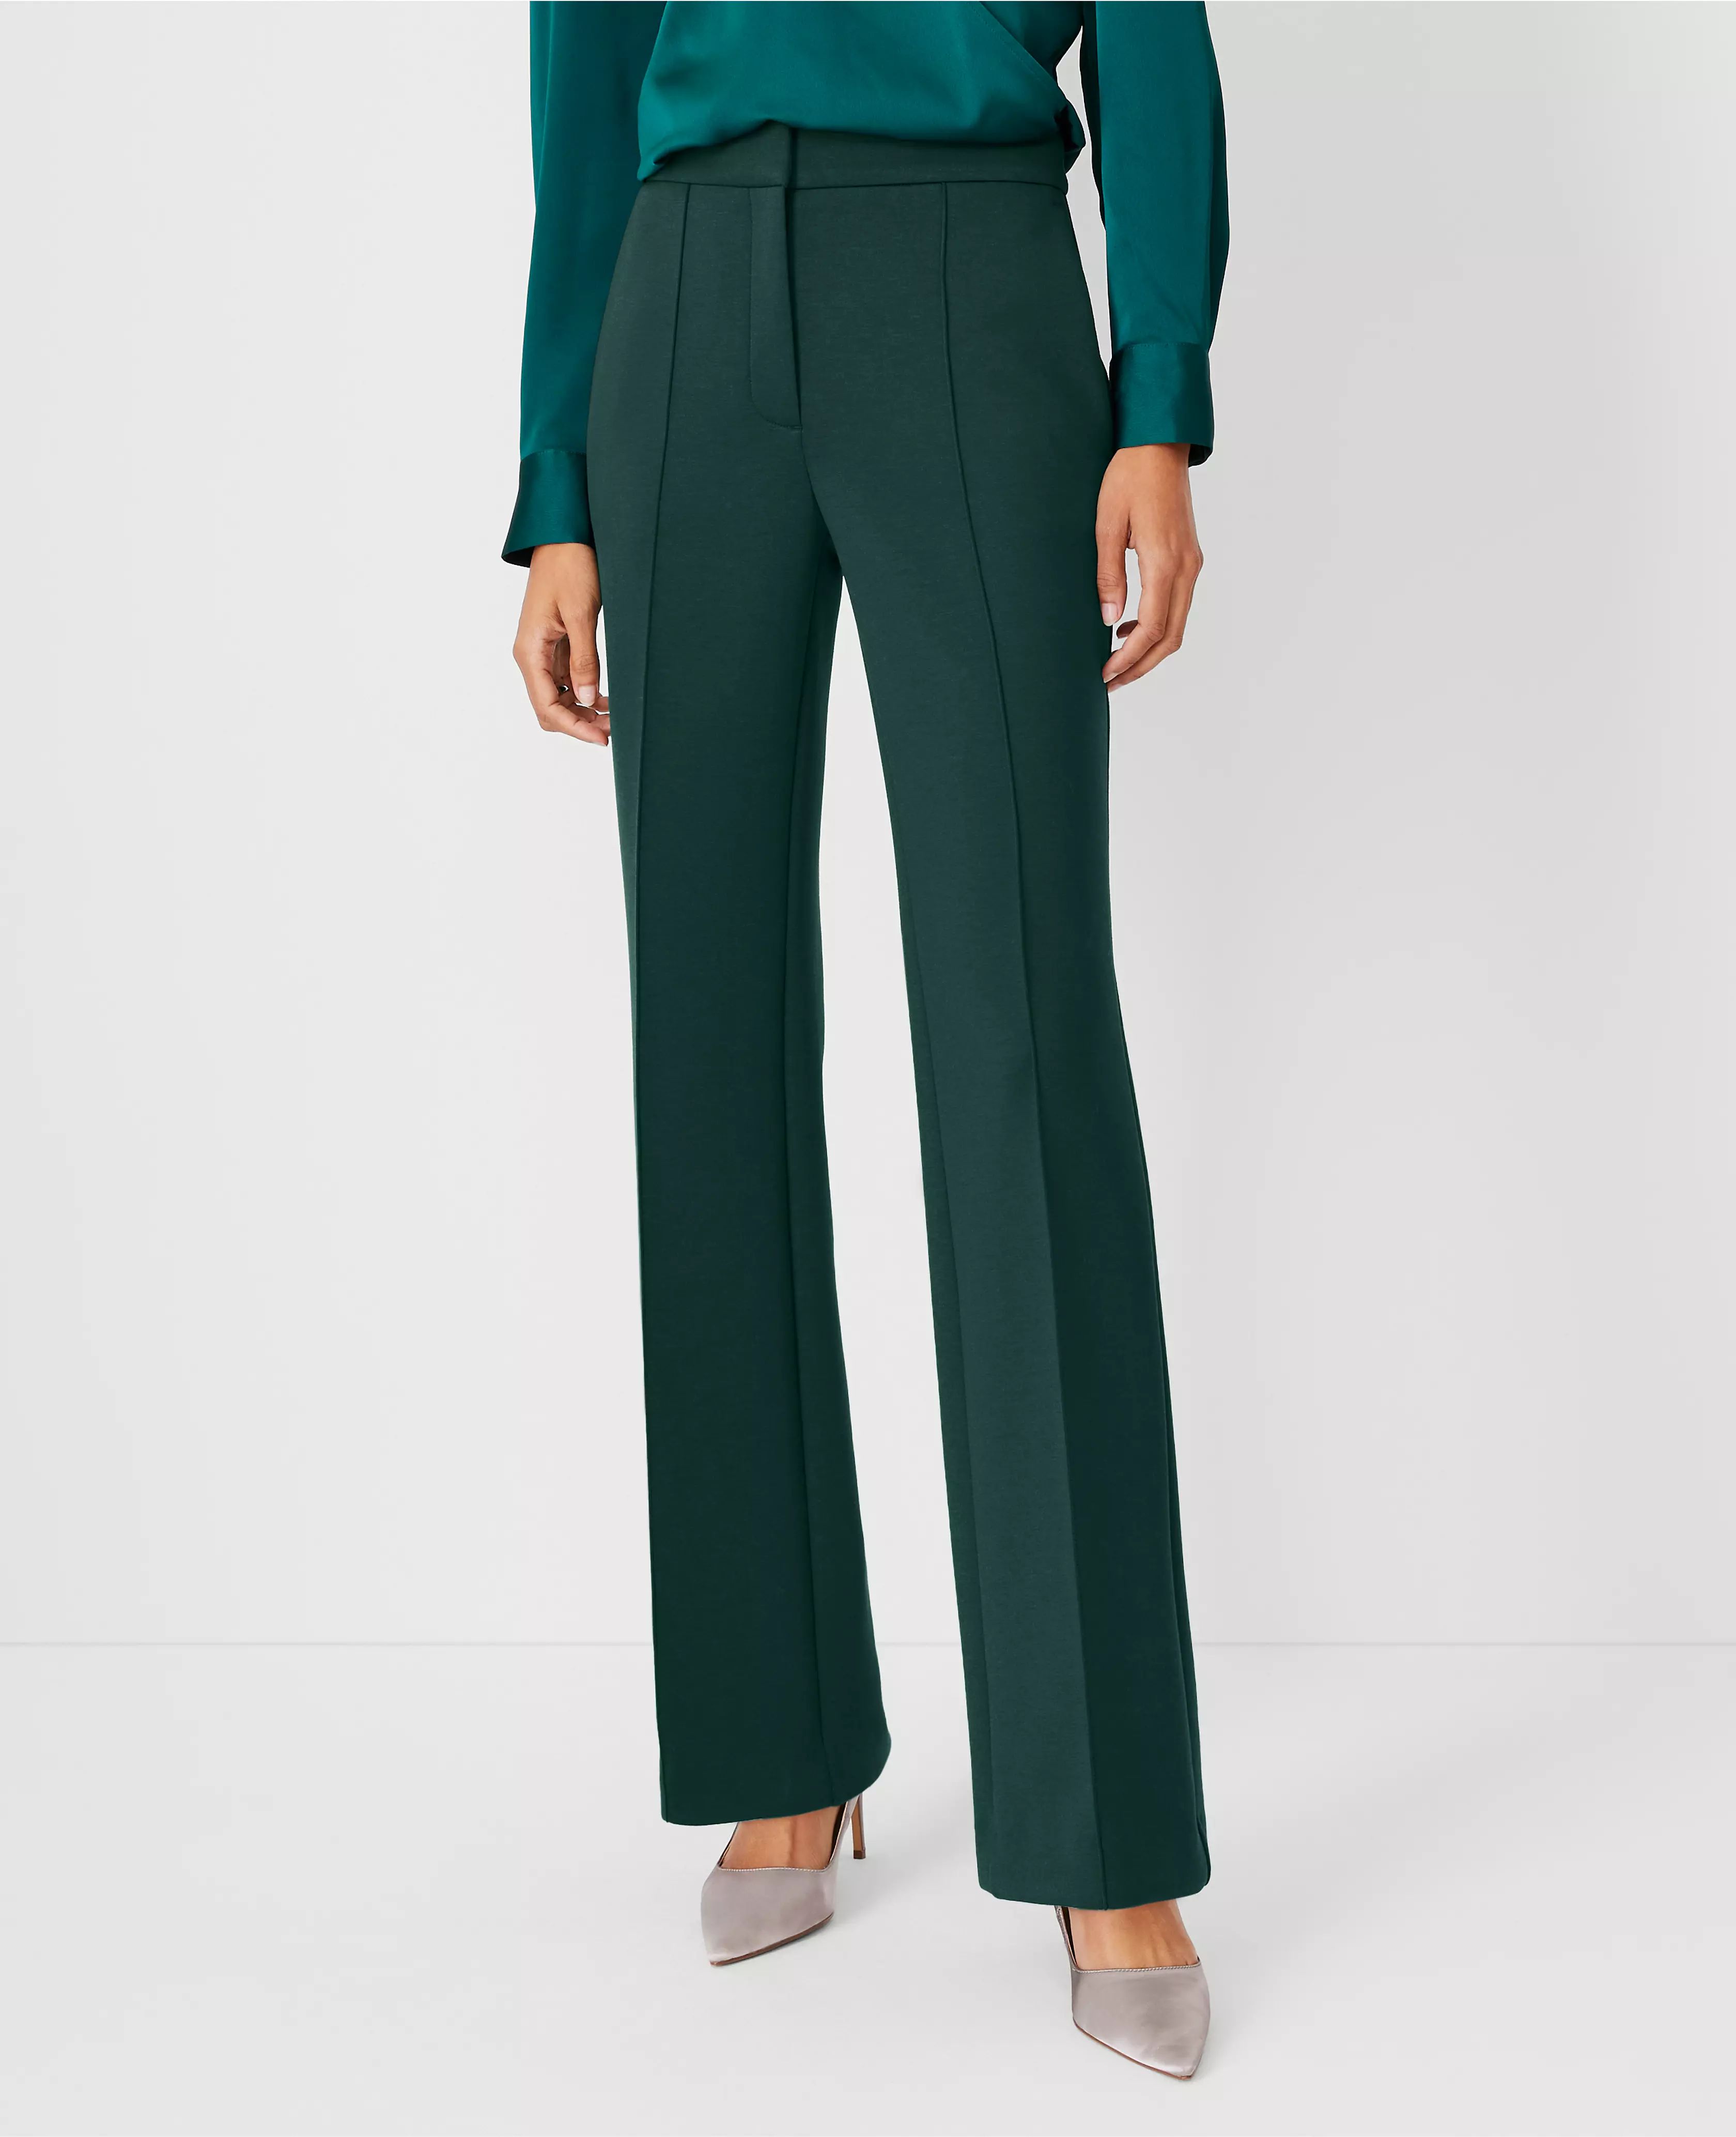 The Pintucked High Rise Trouser Pant in Double Knit | Ann Taylor (US)